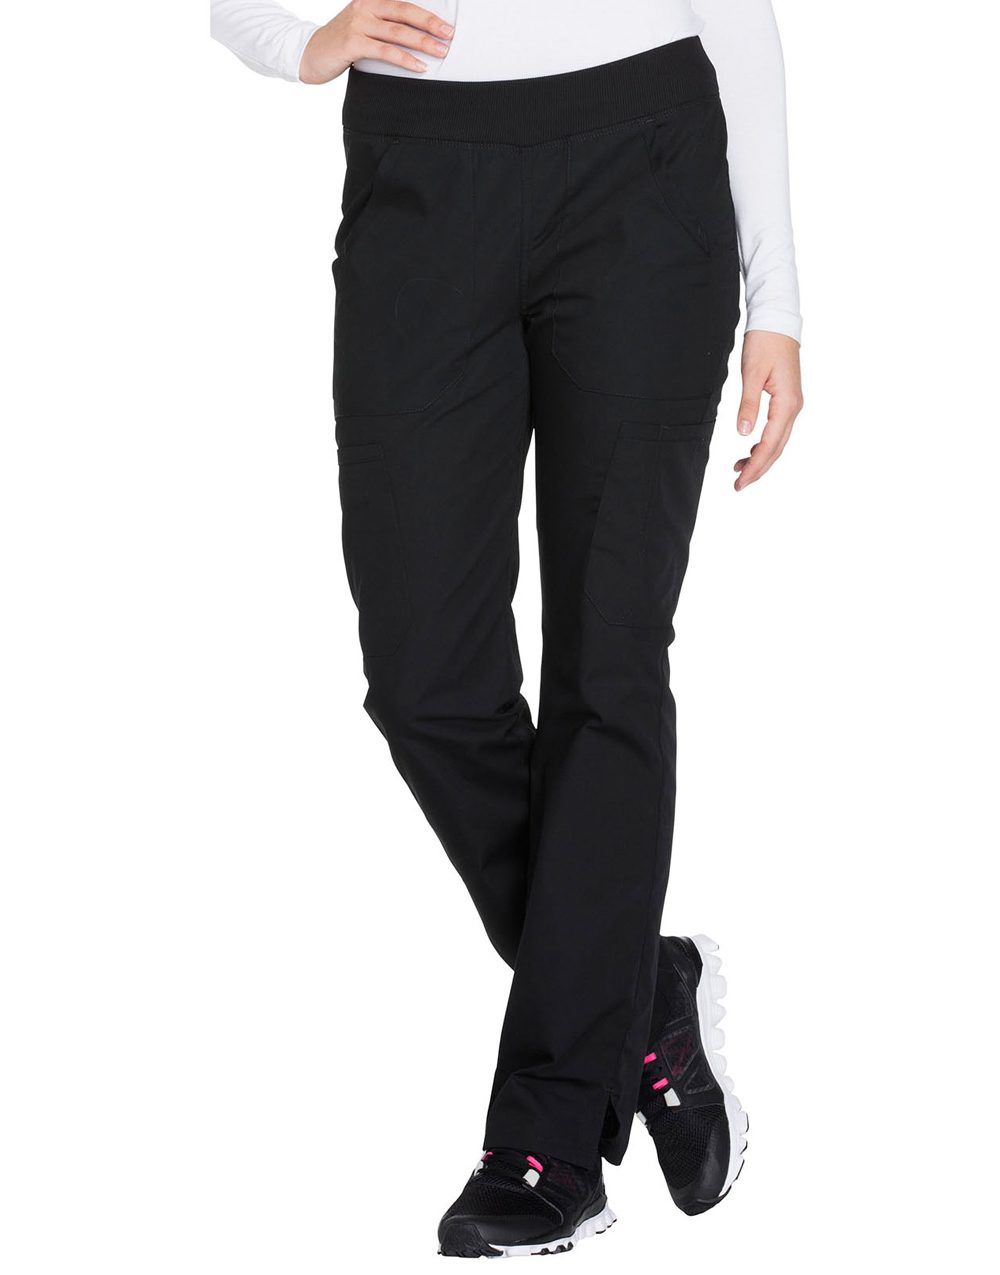 Mid Rise Straight Leg Pull-on Cargo Pant in Petite